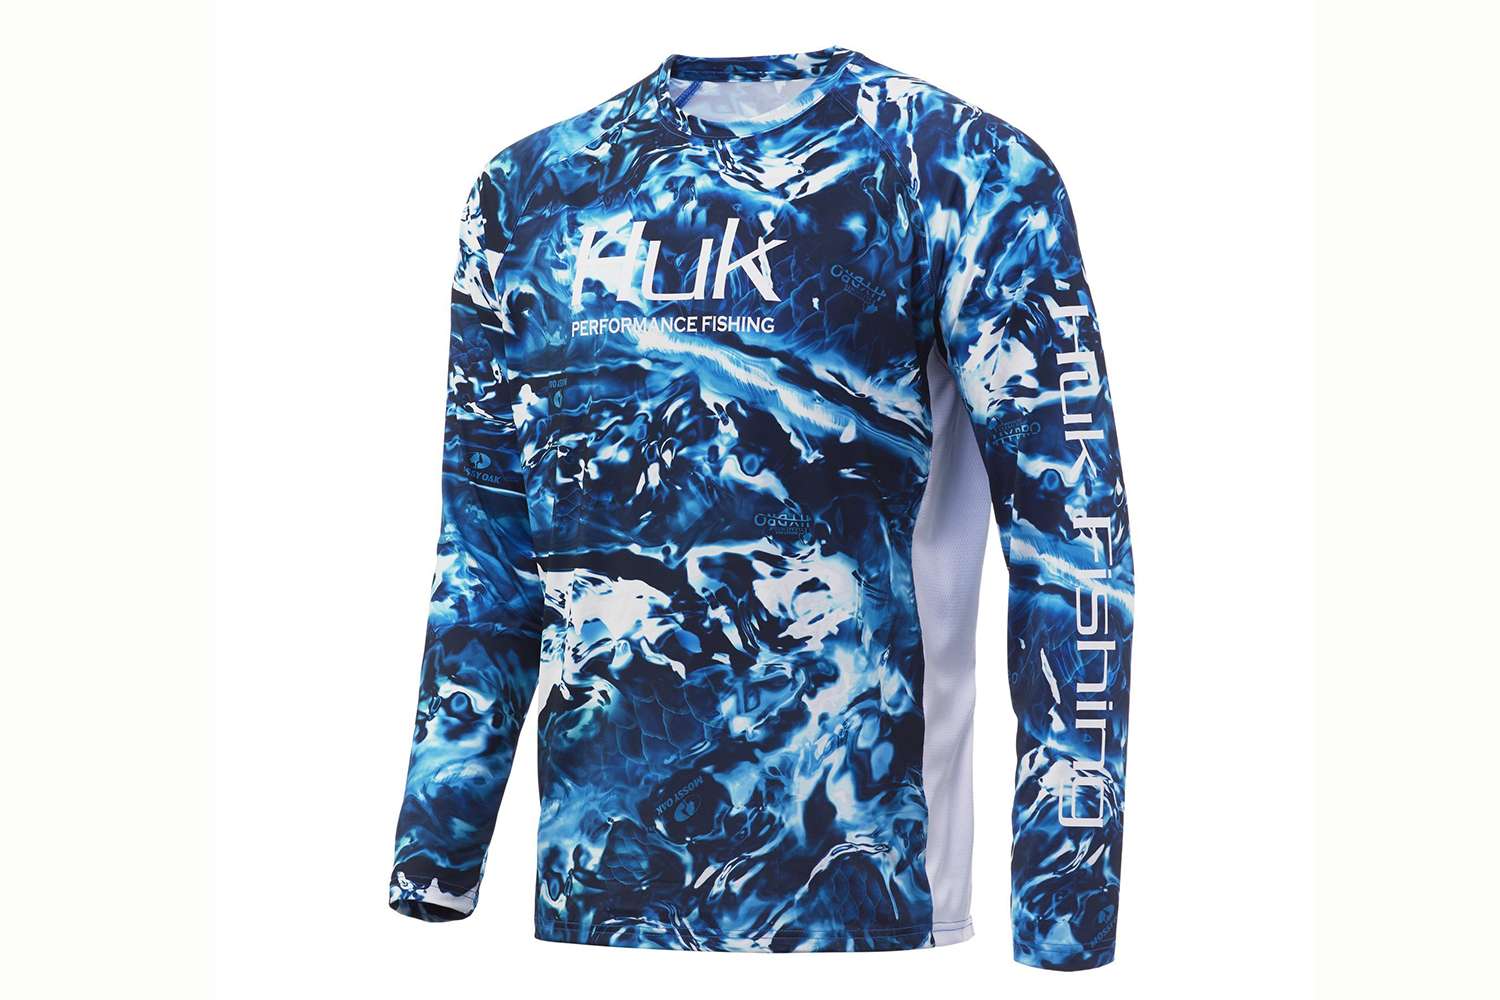 <p><b>Huk Mossy Oak Pursuit Long Sleeve</b></p>
<p>The Huk Mossy Oak Pursuit Long Sleeve is packed with Huk Performance Technology to handle the elements on the water. This lightweight crew neck shirt is an ideal layer on cooler days and perfectly worn by itself when itâs hot. With +UPF 30to block UVA and UVB rays for all-day sun protection, stain-resistant, and anti-microbial treatments, and superior breathability, the Pursuit shirt is a must-have for any anglerâs arsenal. Featuring Mossy Oak Elements Hydro, the Pursuit collection showcases patterns to blend into the environment you're âpursuingâ within the sport.</p>
<p><a href=